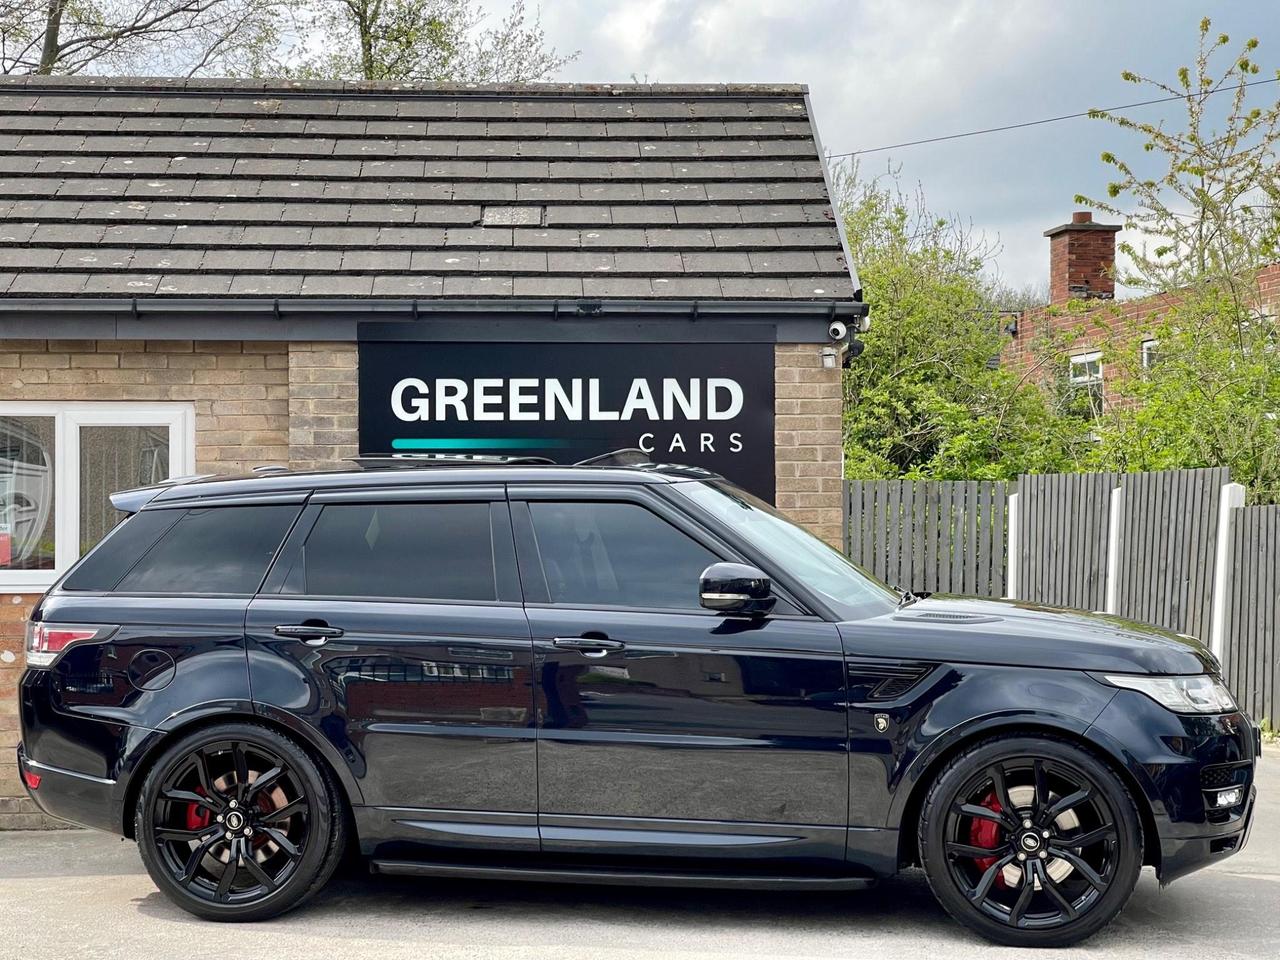 Used 2014 Land Rover Range Rover Sport for sale in Sheffield